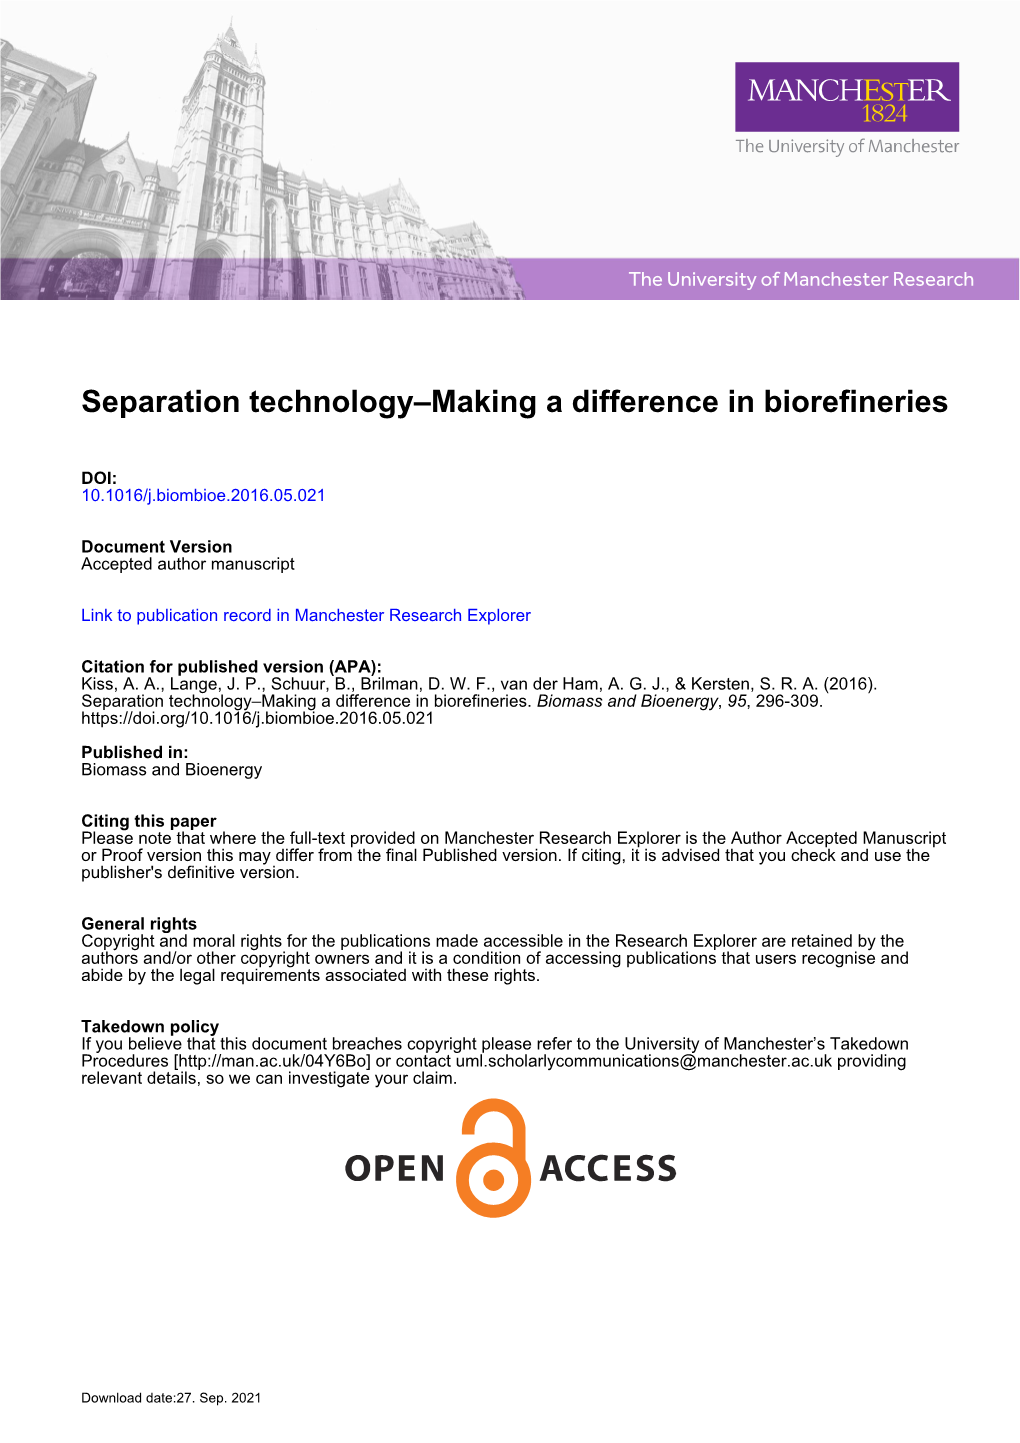 Separation Technology–Making a Difference in Biorefineries